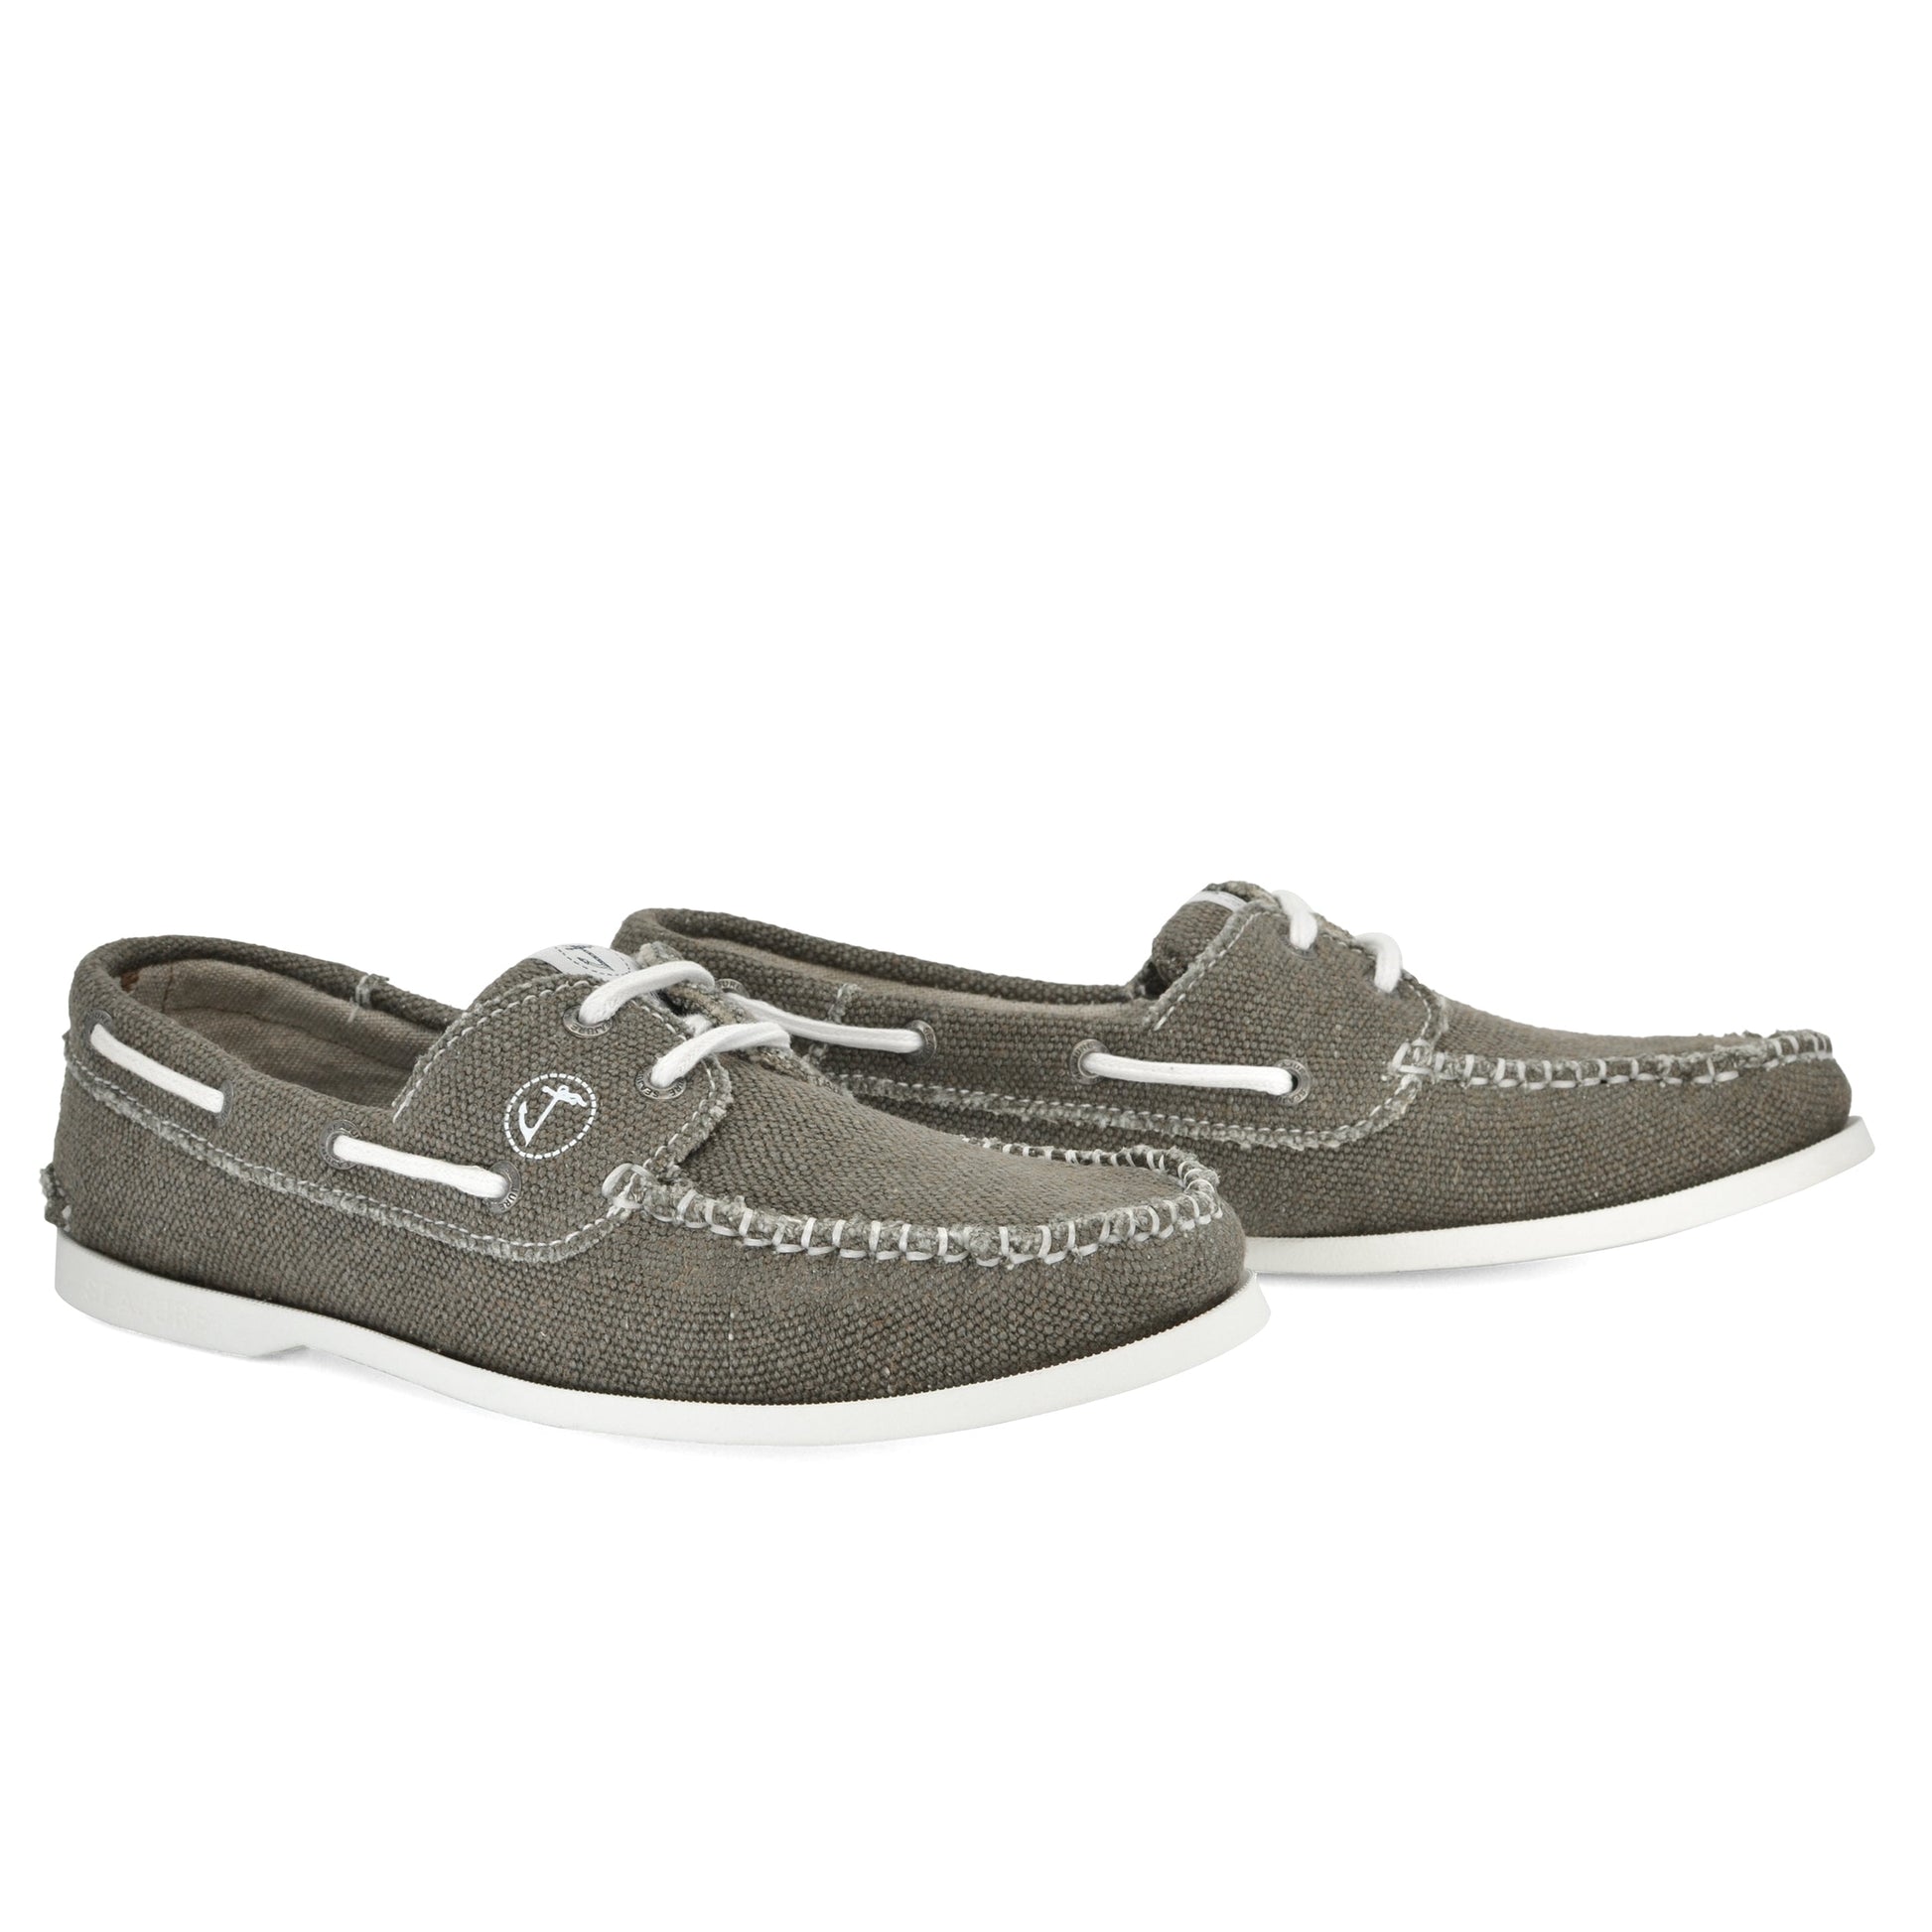 A pair of gray Amethyst Hestia Men Hemp & Vegan Boat Shoe Scopello with white laces and white soles, featuring stitching details around the edges, made from premium hemp and natural rubber.